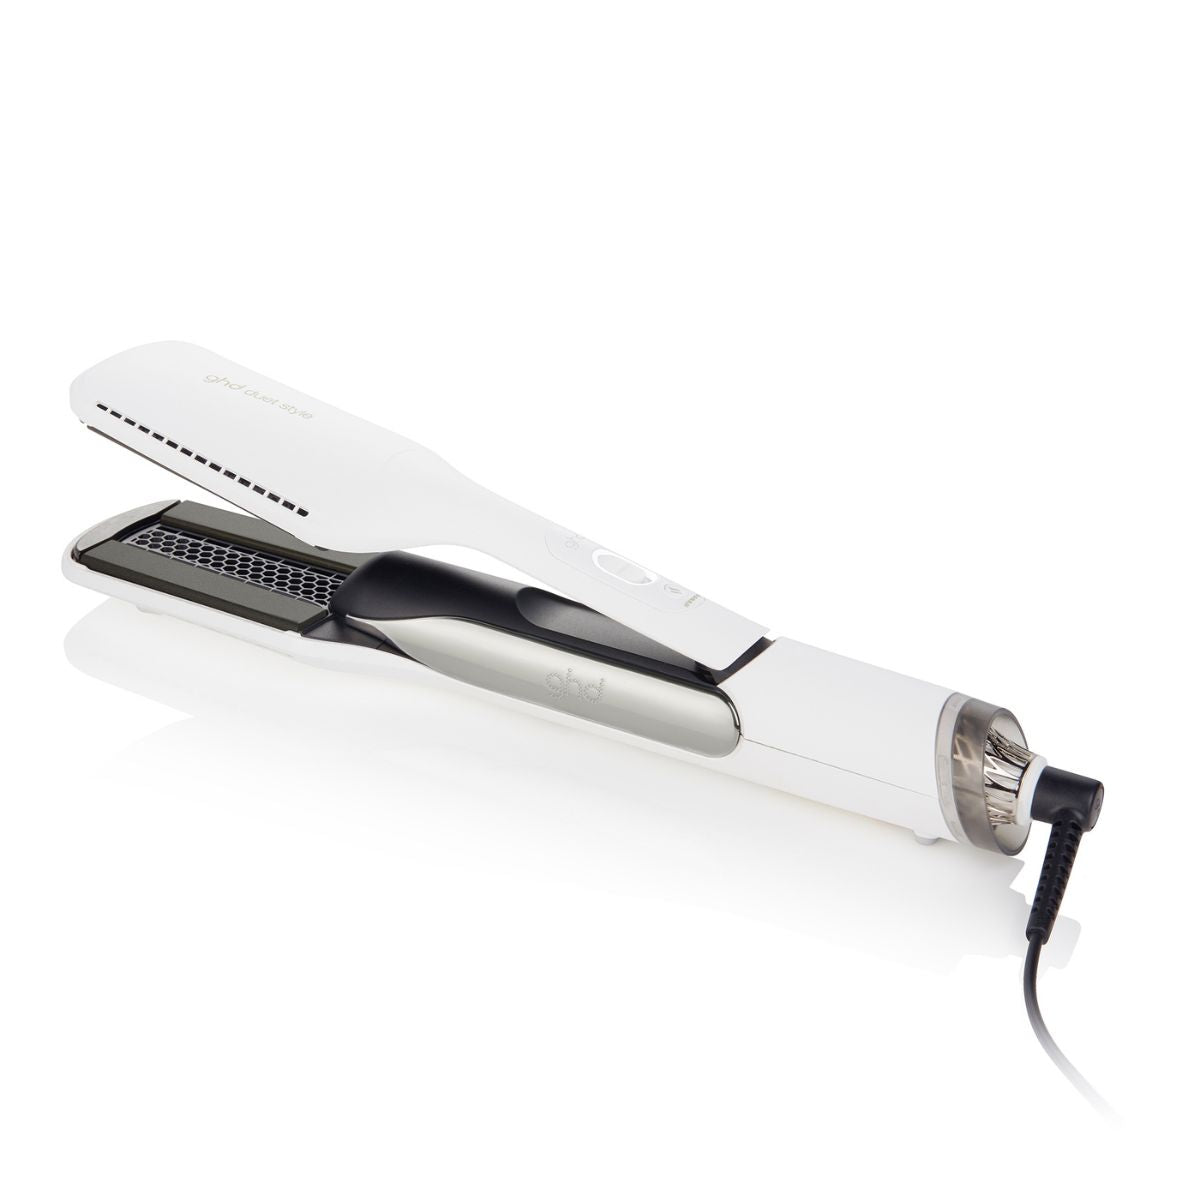 Ghd Duet Style 2-in-1 Hot Air Styler in White